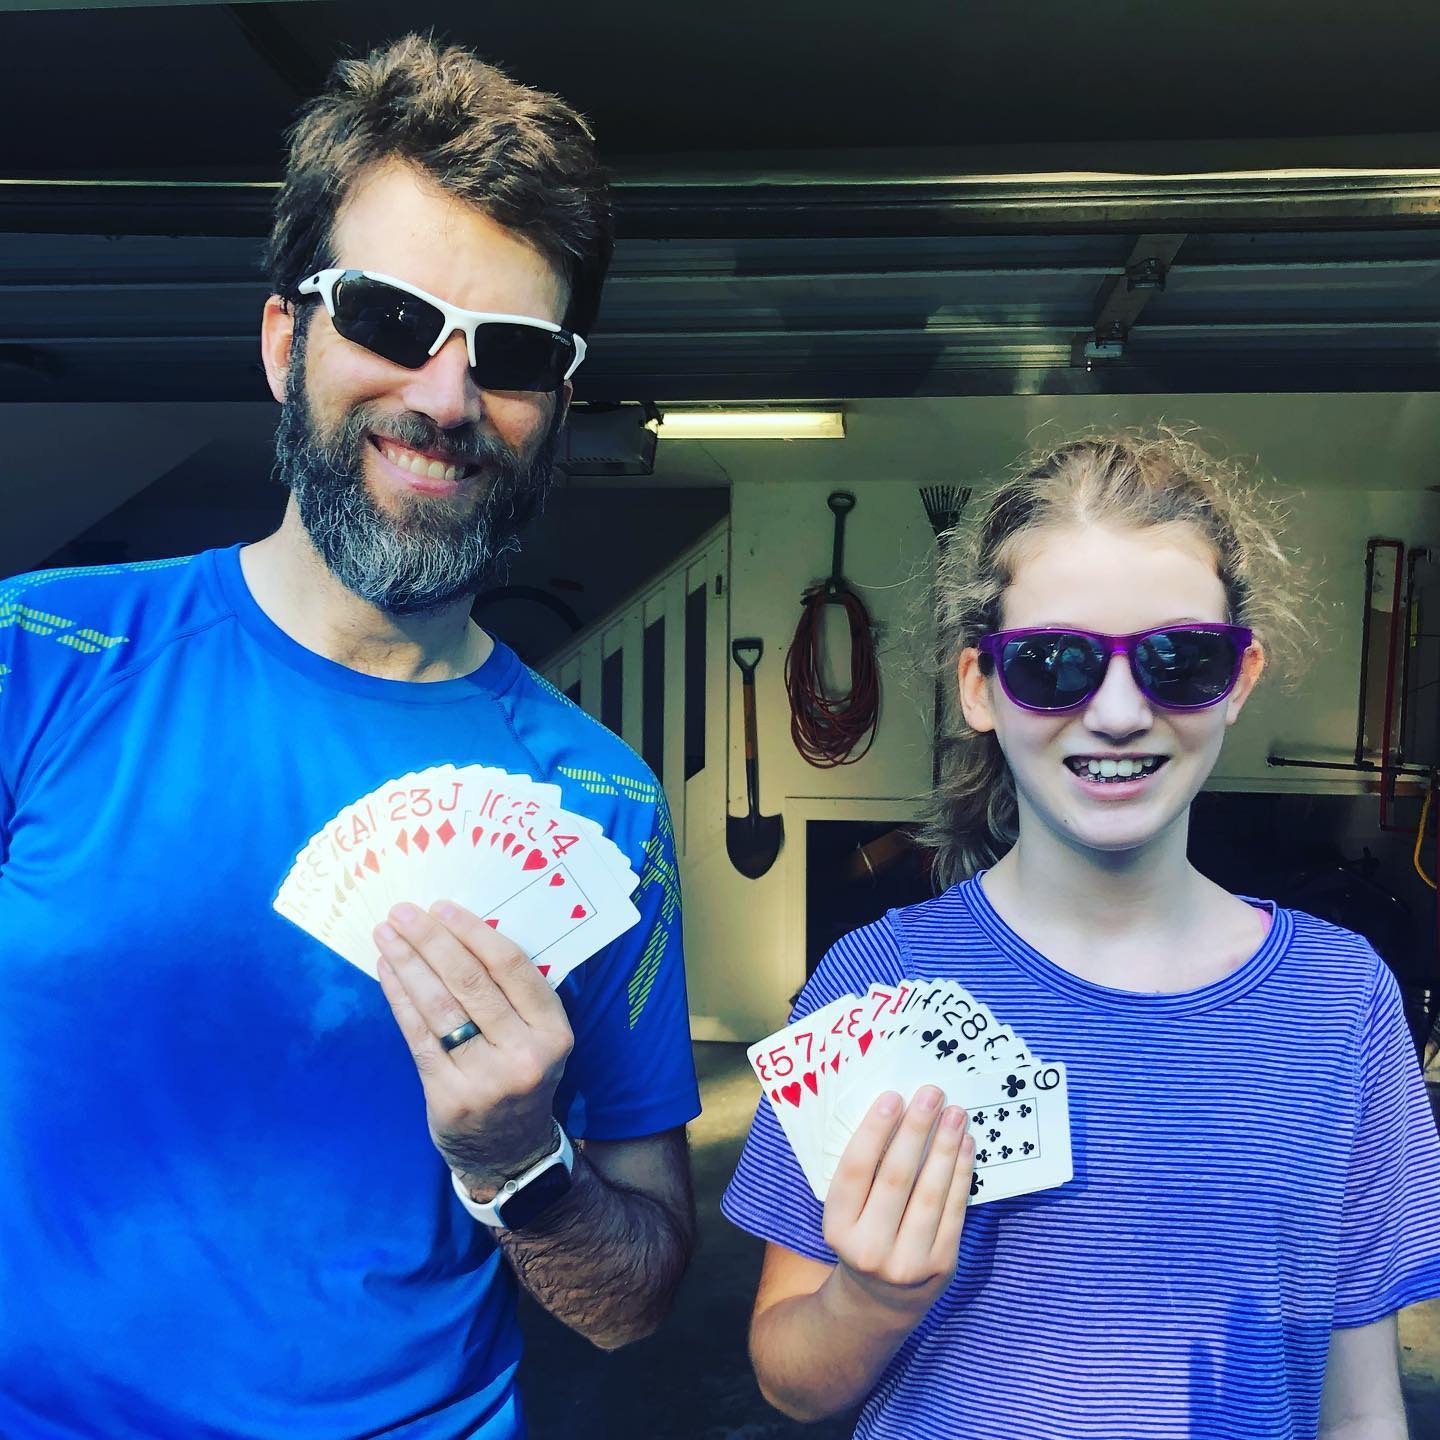 Sara and I did our deck-of-cards partner workout again today. Each person takes turns drawing a single card and you work through the entire deck. The suit determines what exercise you do and the number defines the reps. In total Sara did 38 sit-ups, 67 pushups, 47 squats, and 43 burpees. I did 56 sit-ups, 27 pushups, 49 squats, and 51 burpees. As always, this is a really fun way to workout. #family #workout